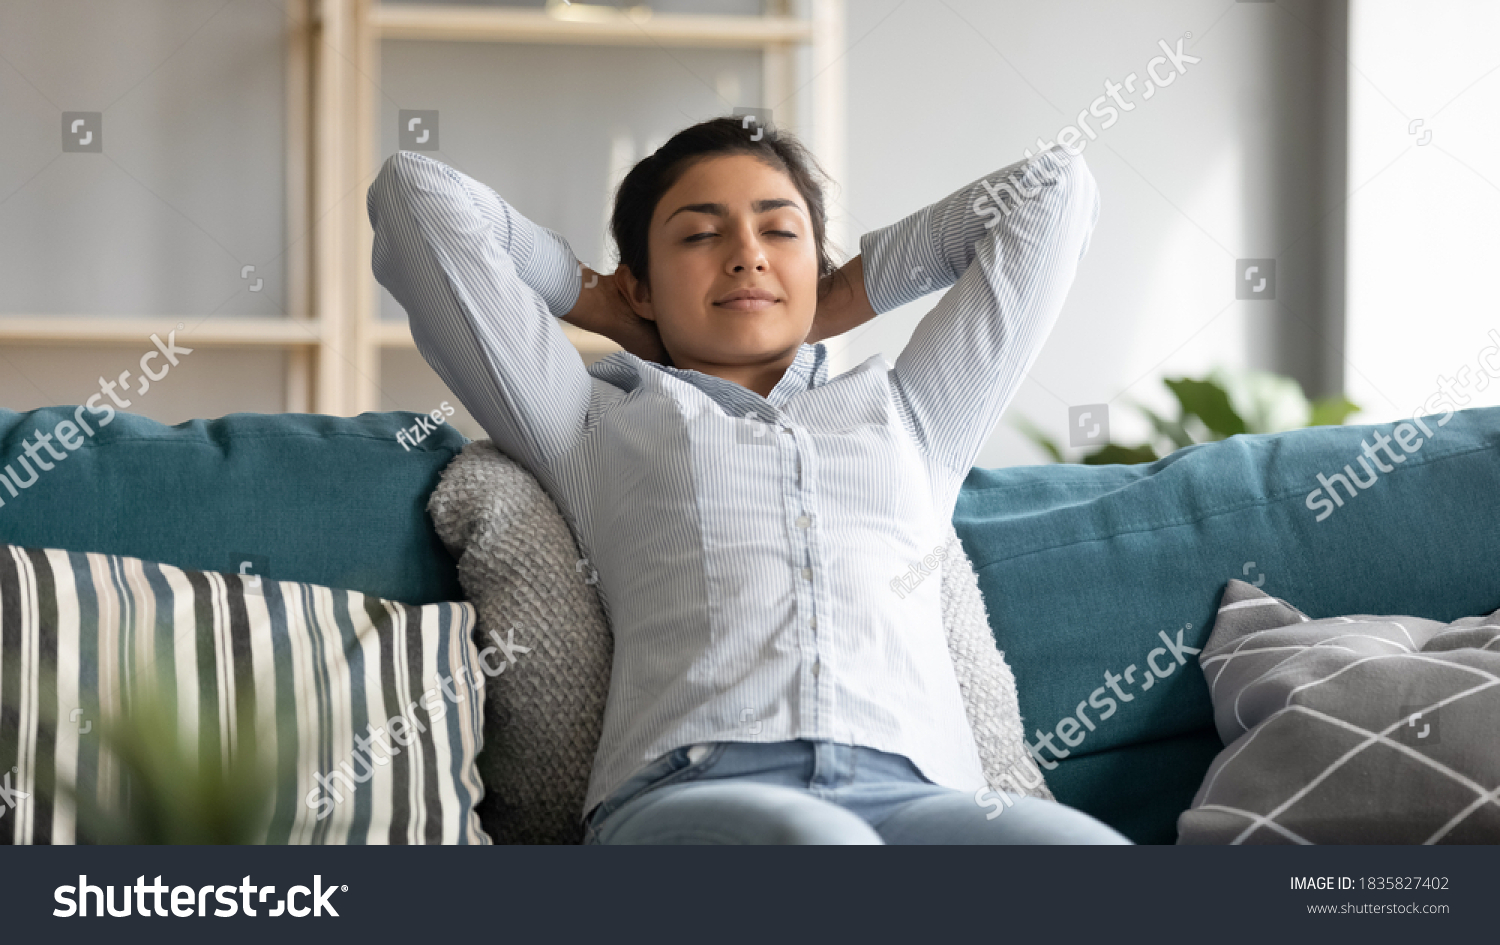 Serene Indian woman closed eyes breath fresh humified air in cozy living room alone put hands behind head lean on sofa having day nap alone, reduces fatigue, enjoy pleasant thoughts, no stress concept #1835827402